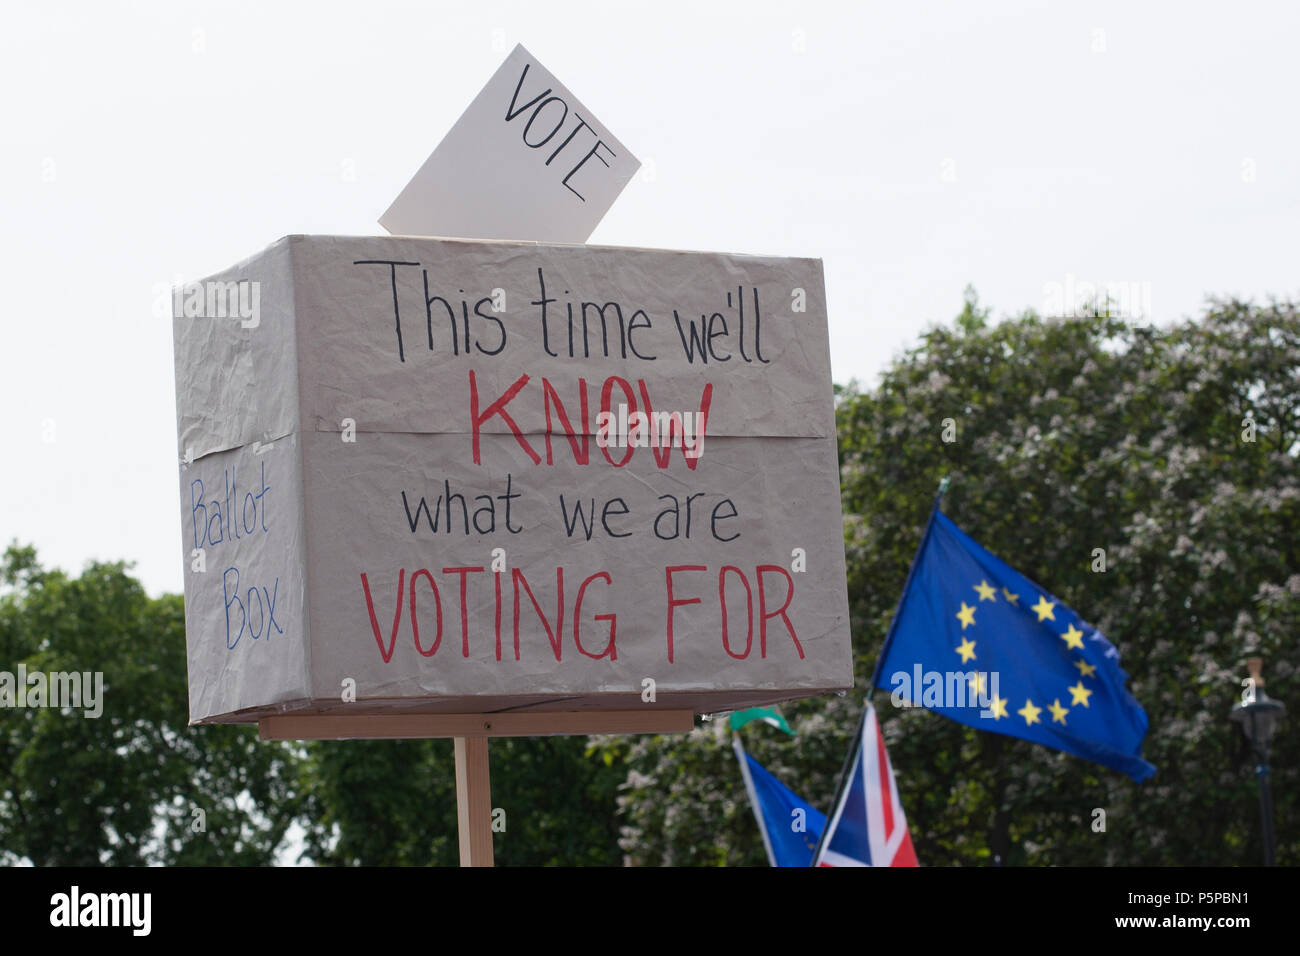 People's Vote March, London, UK, 23rd June 2018. Ballot box -This time we will know what we are voting for. Stock Photo